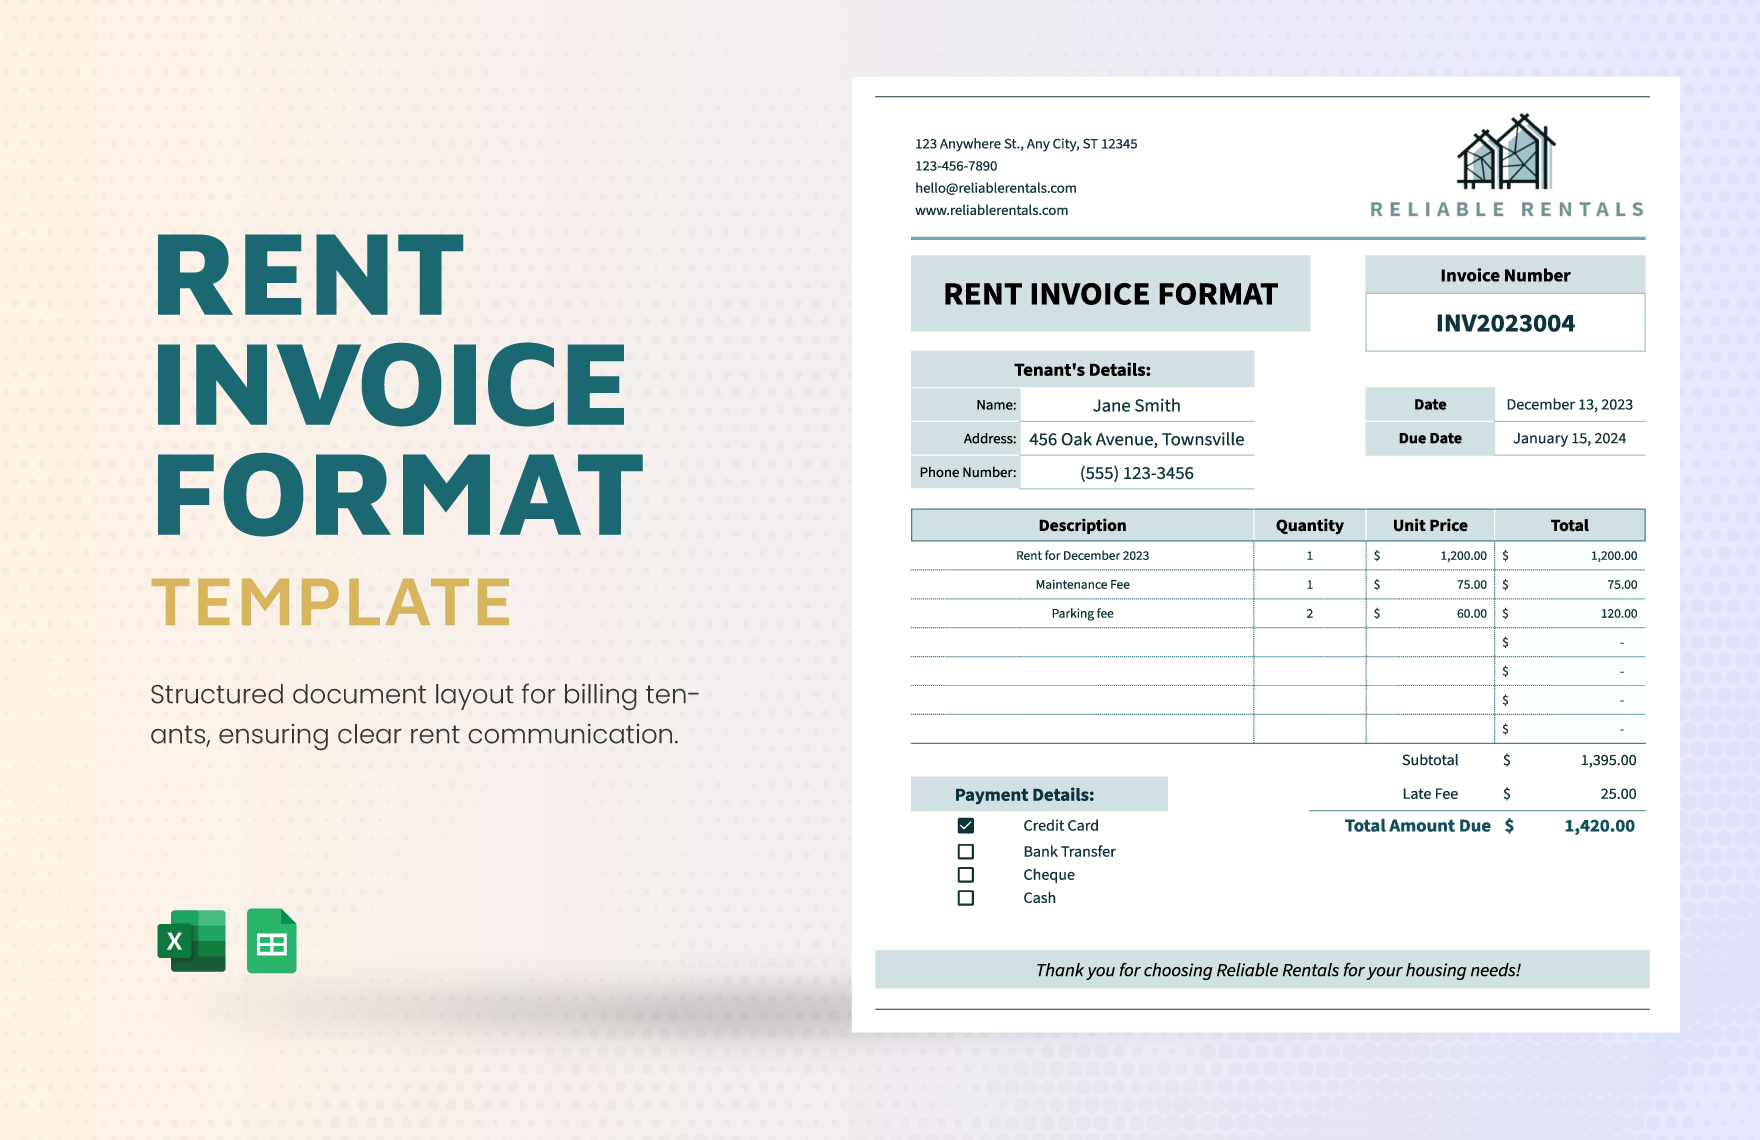 Free Rent Invoice Format Template in Excel, Google Sheets